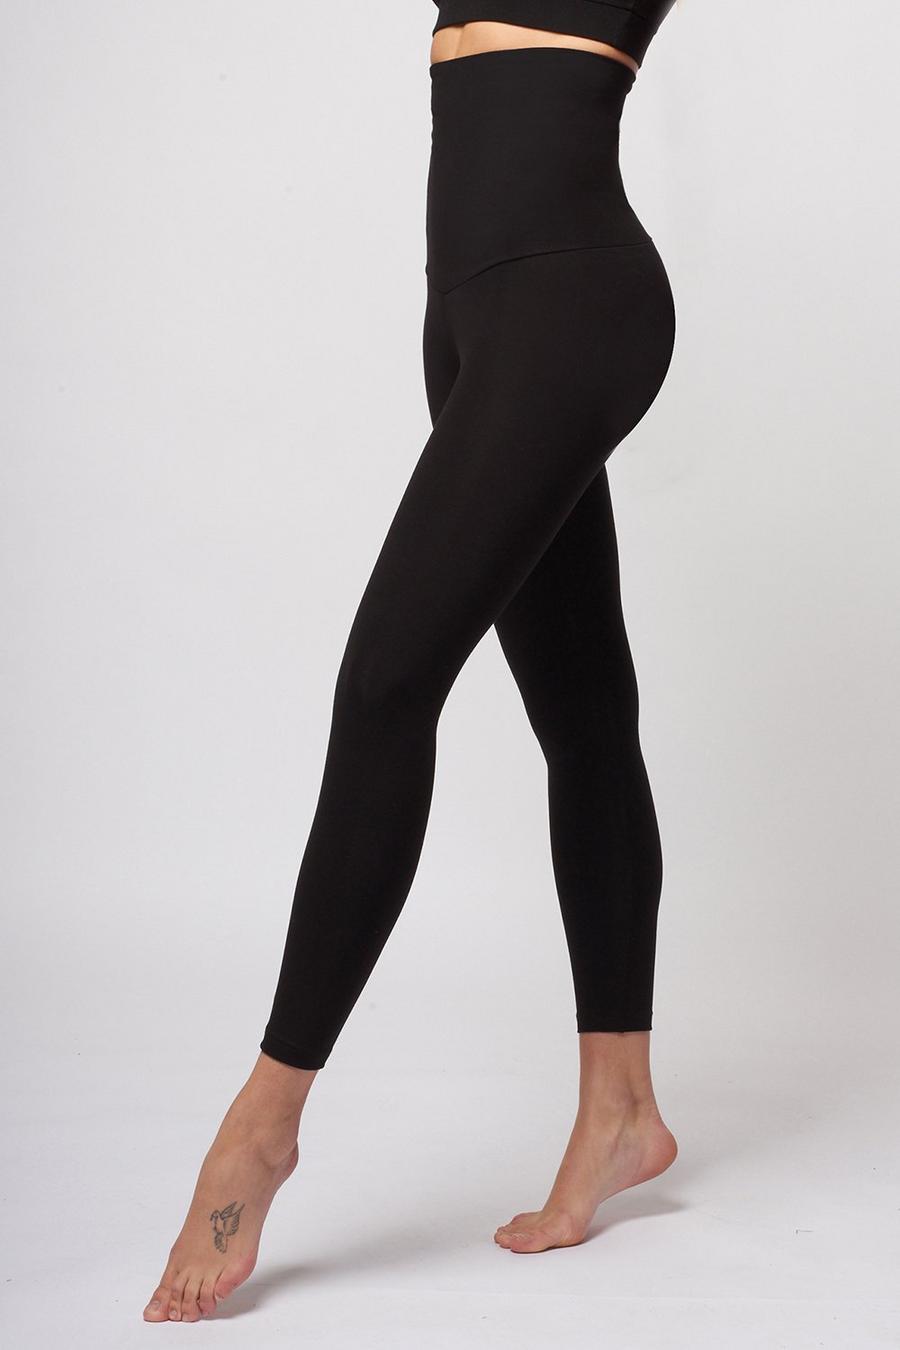 Black High Tummy Control Extra Strong Compression Leggings